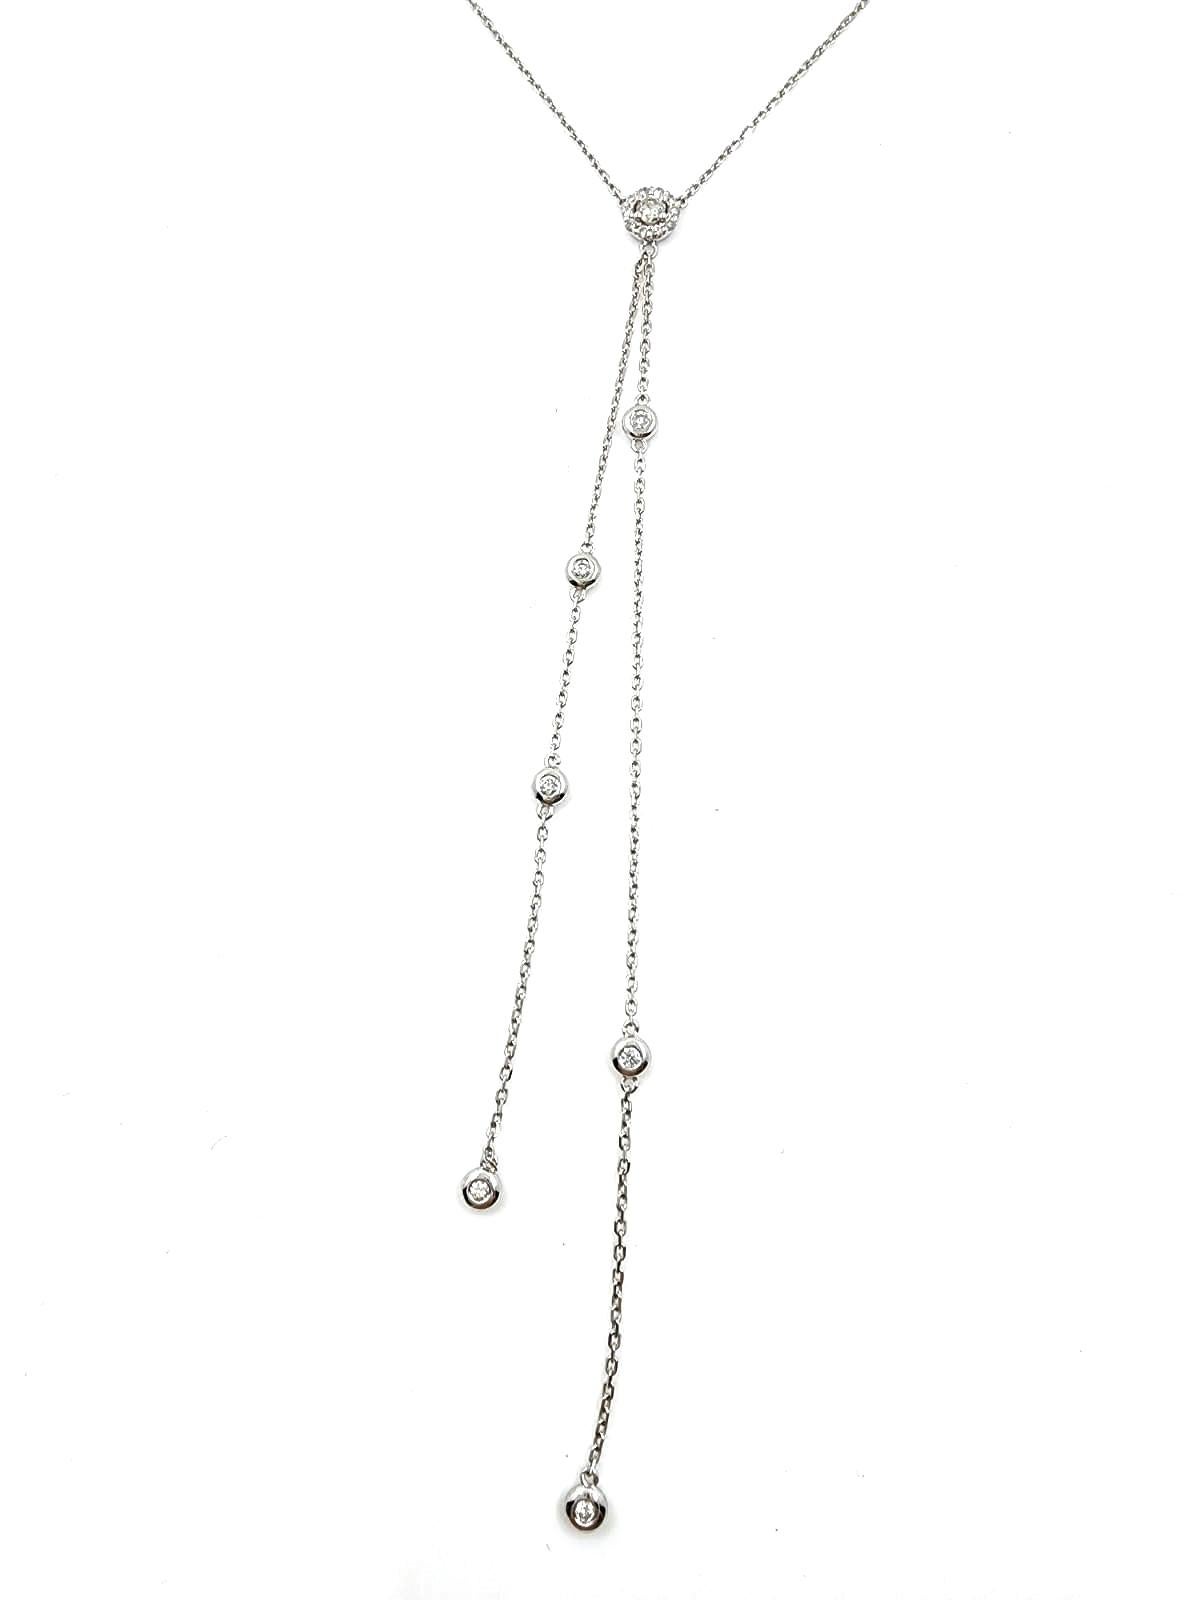 Brilliant Cut Diamond by the Yard Necklace in 18 Karat White Gold For Sale